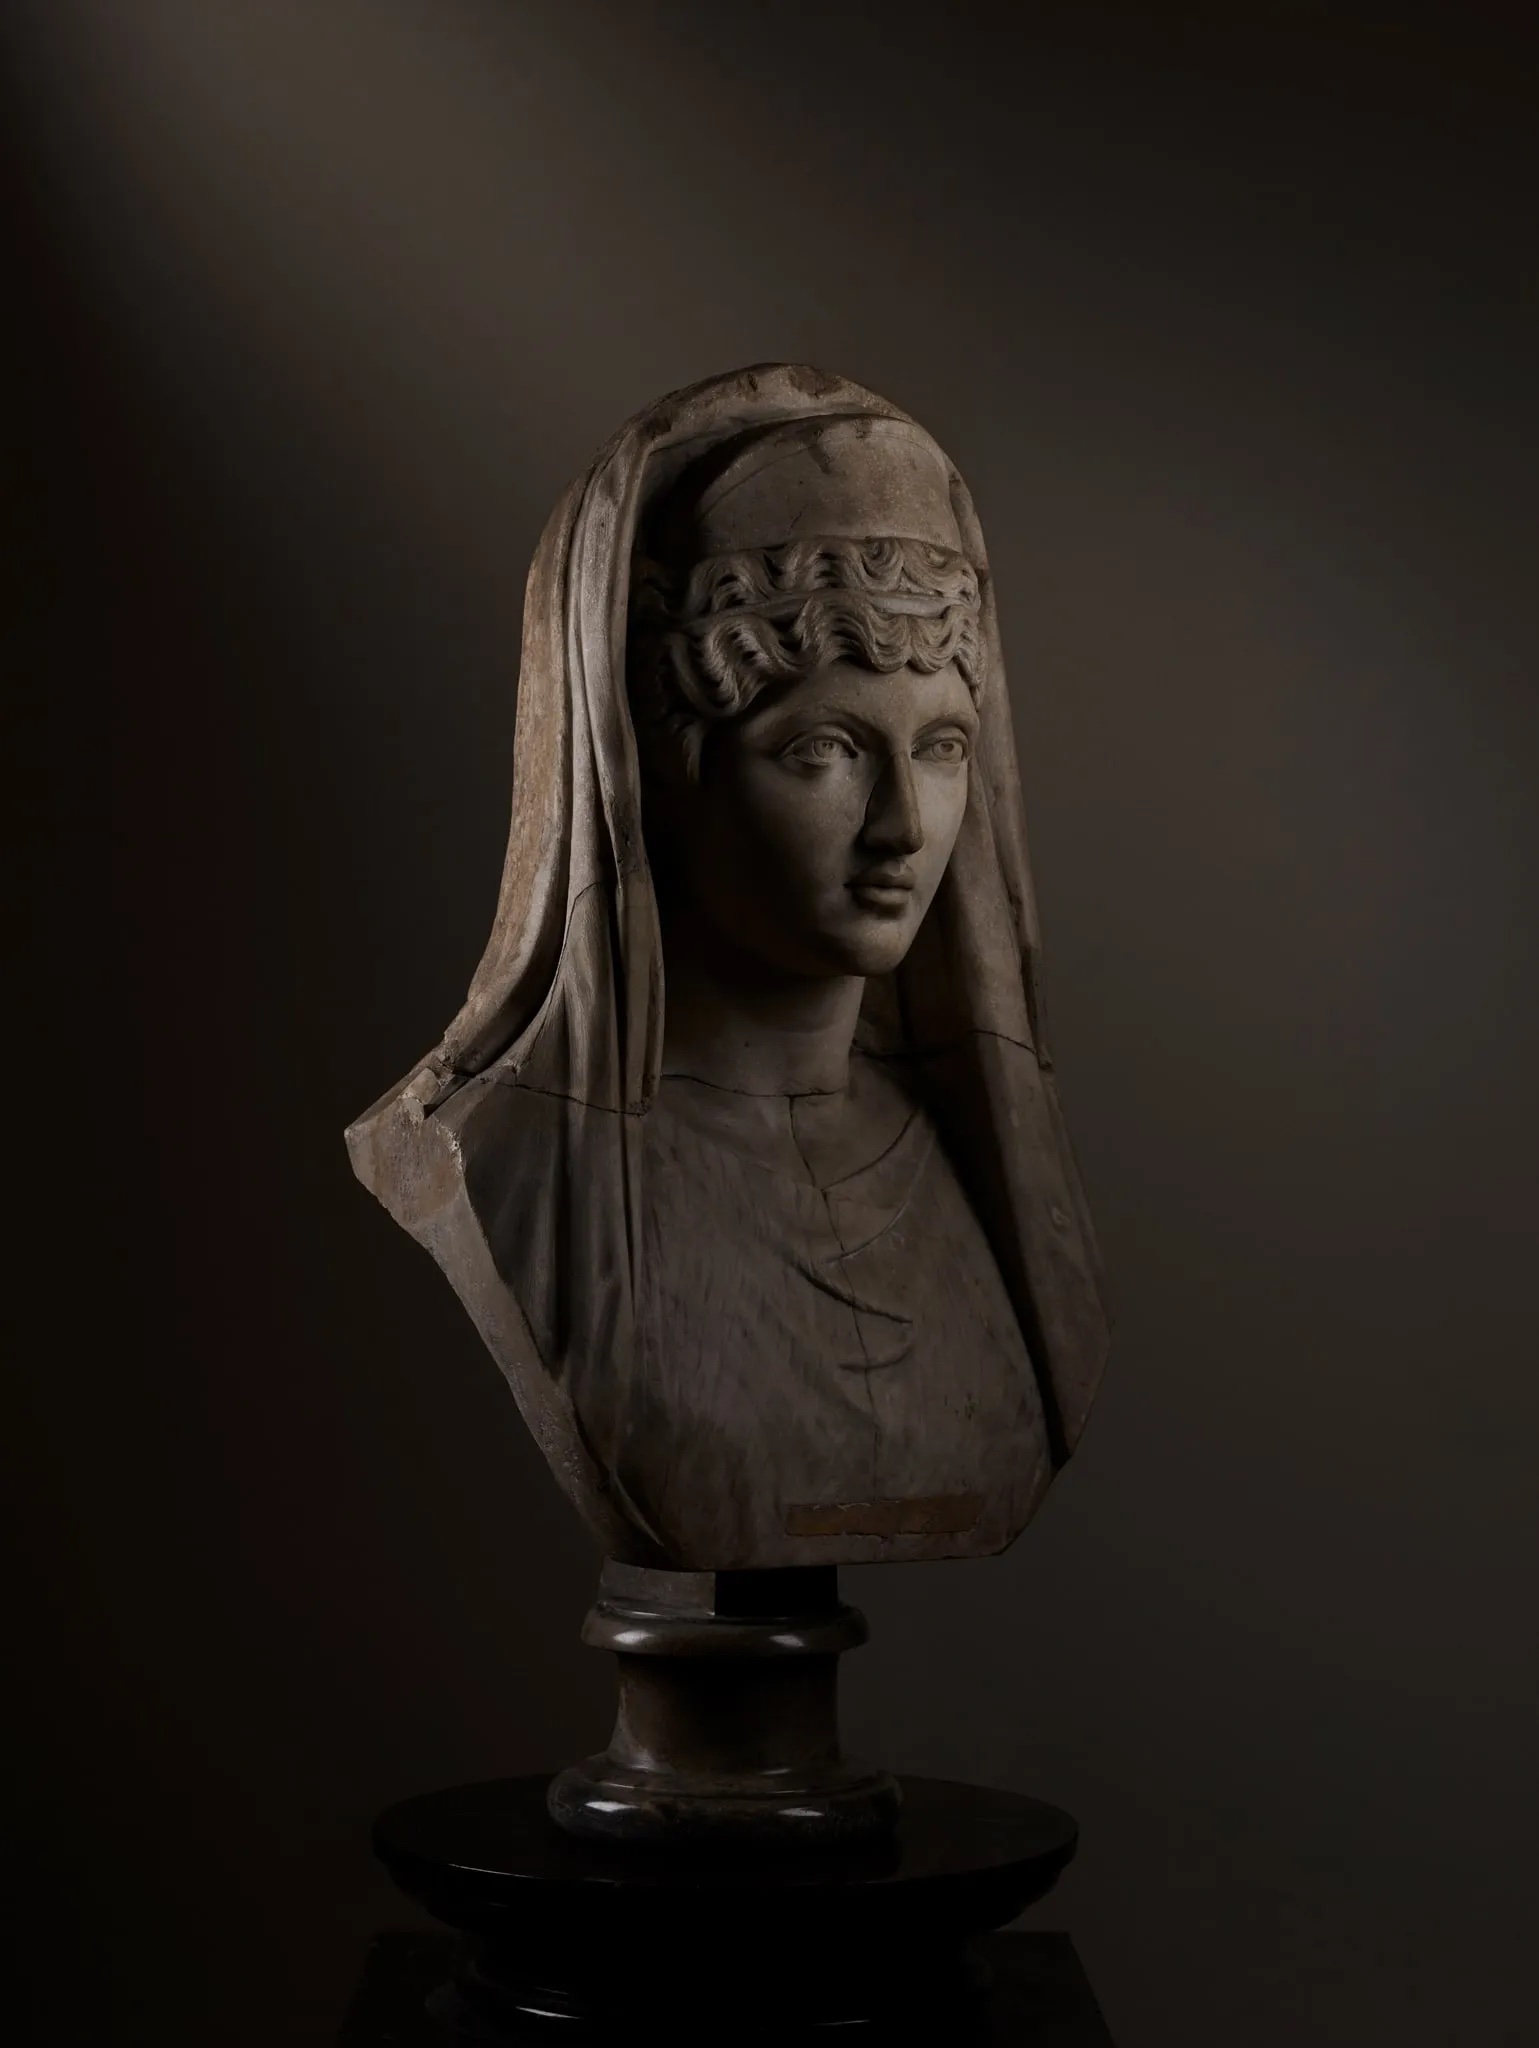 Roman Antonine marble bust of Faustina the Elder, which hammered for £600,000 ($767,360) and sold for £780,000 ($988,120) with buyer’s premium at Lyon & Turnbull.